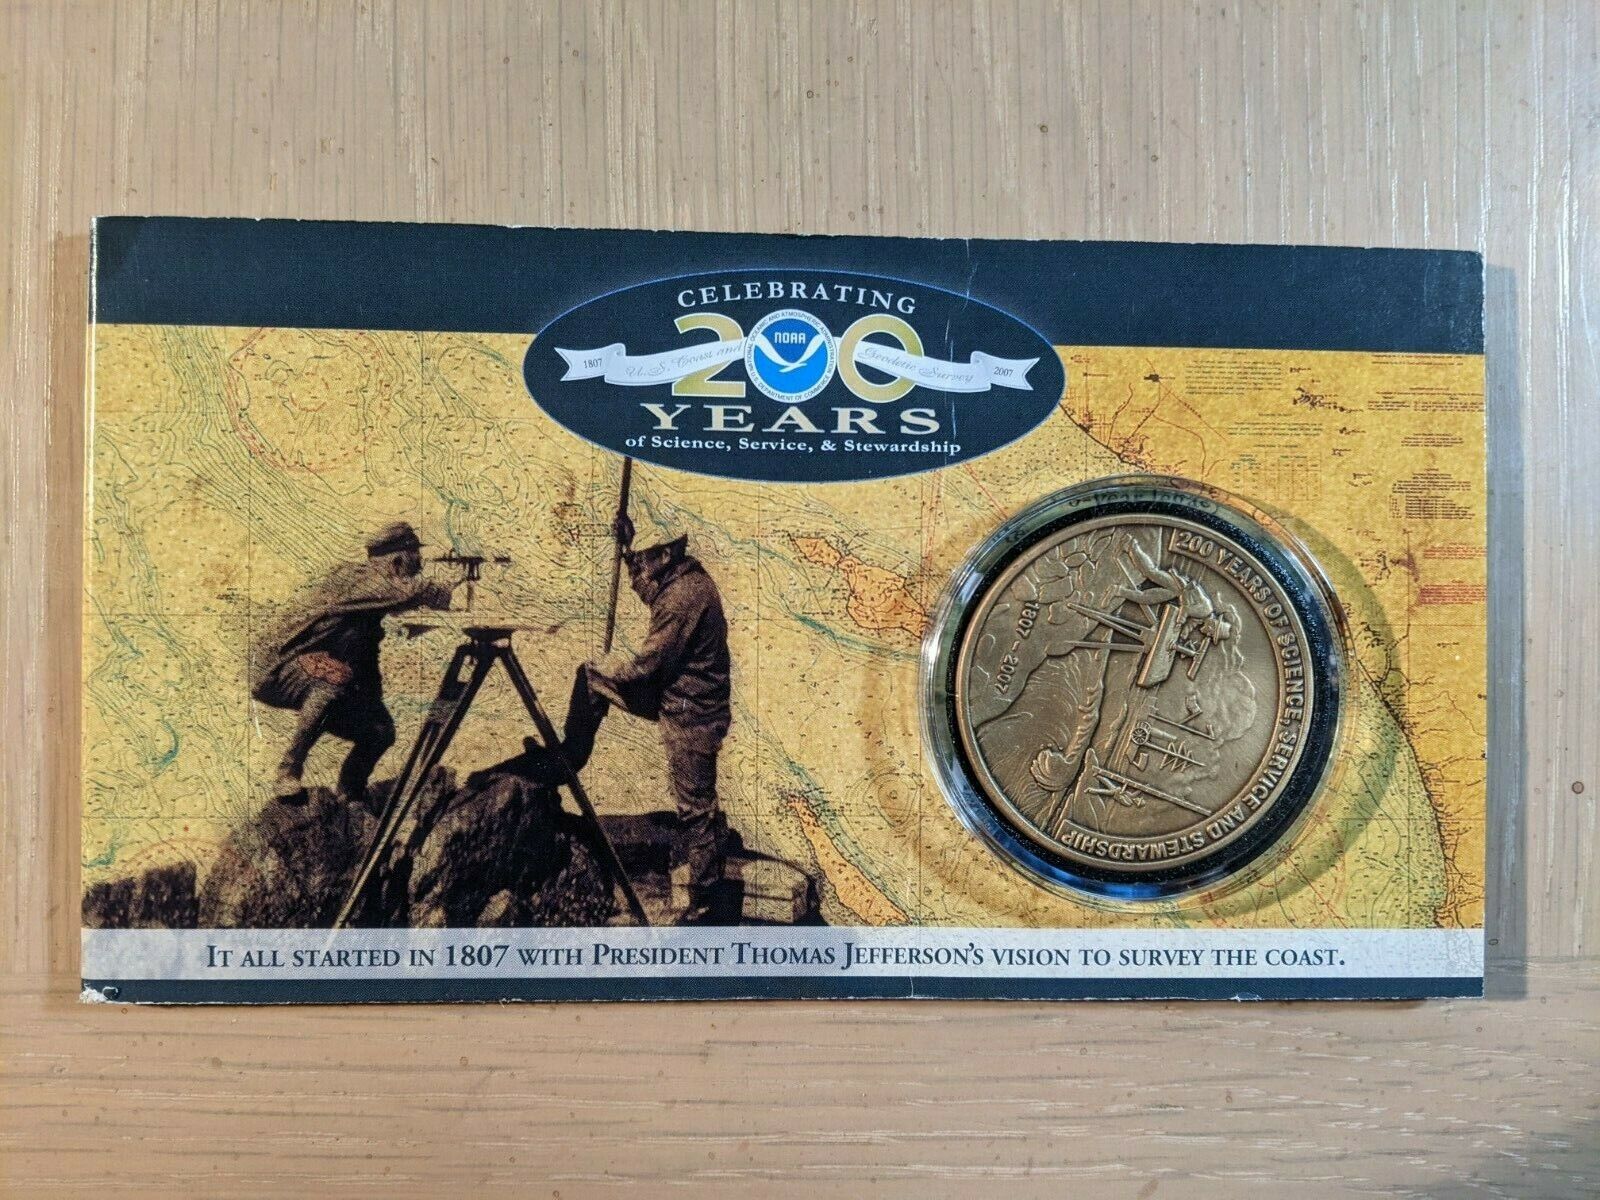 RARE NOAA 200 YEARS OF SCIENCE, SERVICE AND STEWARDSHIP 2007 COIN